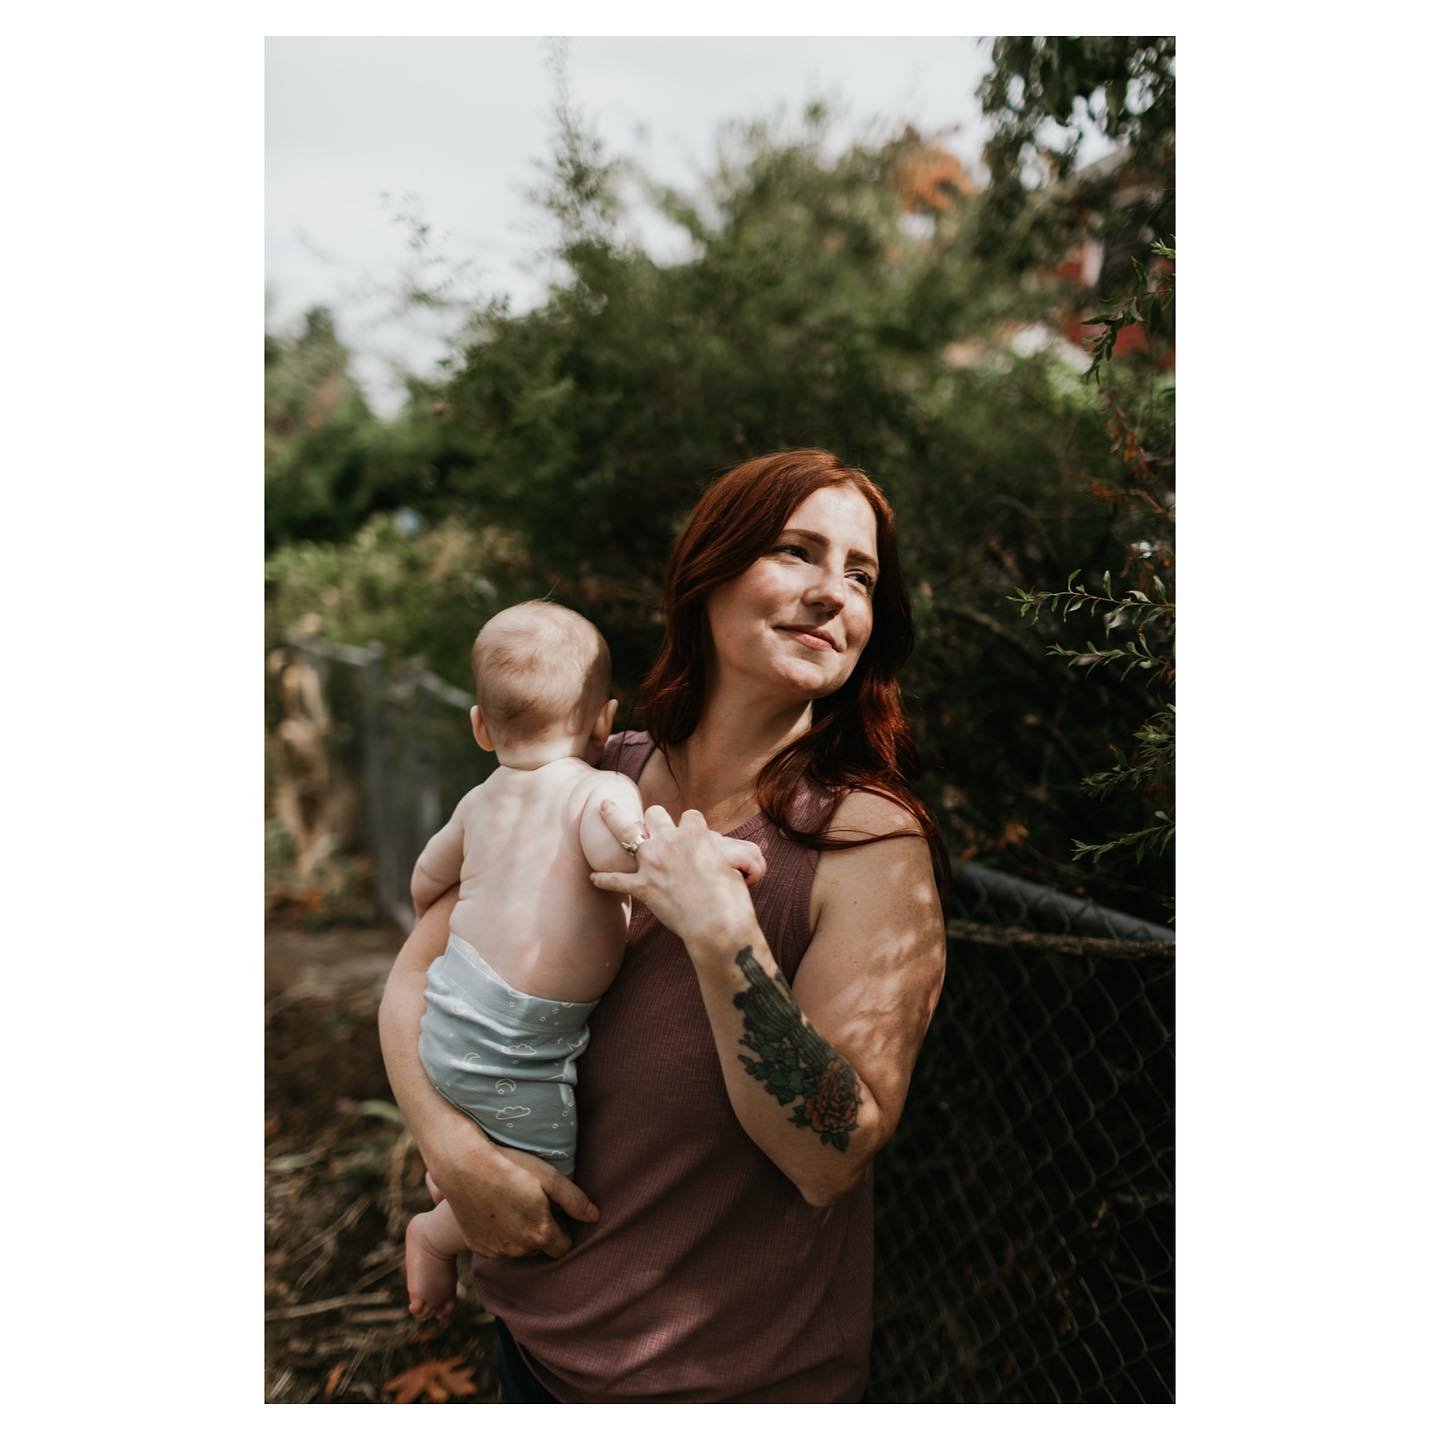 this darling little family on a late summer morning ♡ also: it&rsquo;s already october and the fall has arrived and I still have a few more openings for family sessions before the holidays&mdash;ring my bell if you wanna make some picshuuurs &hearts;